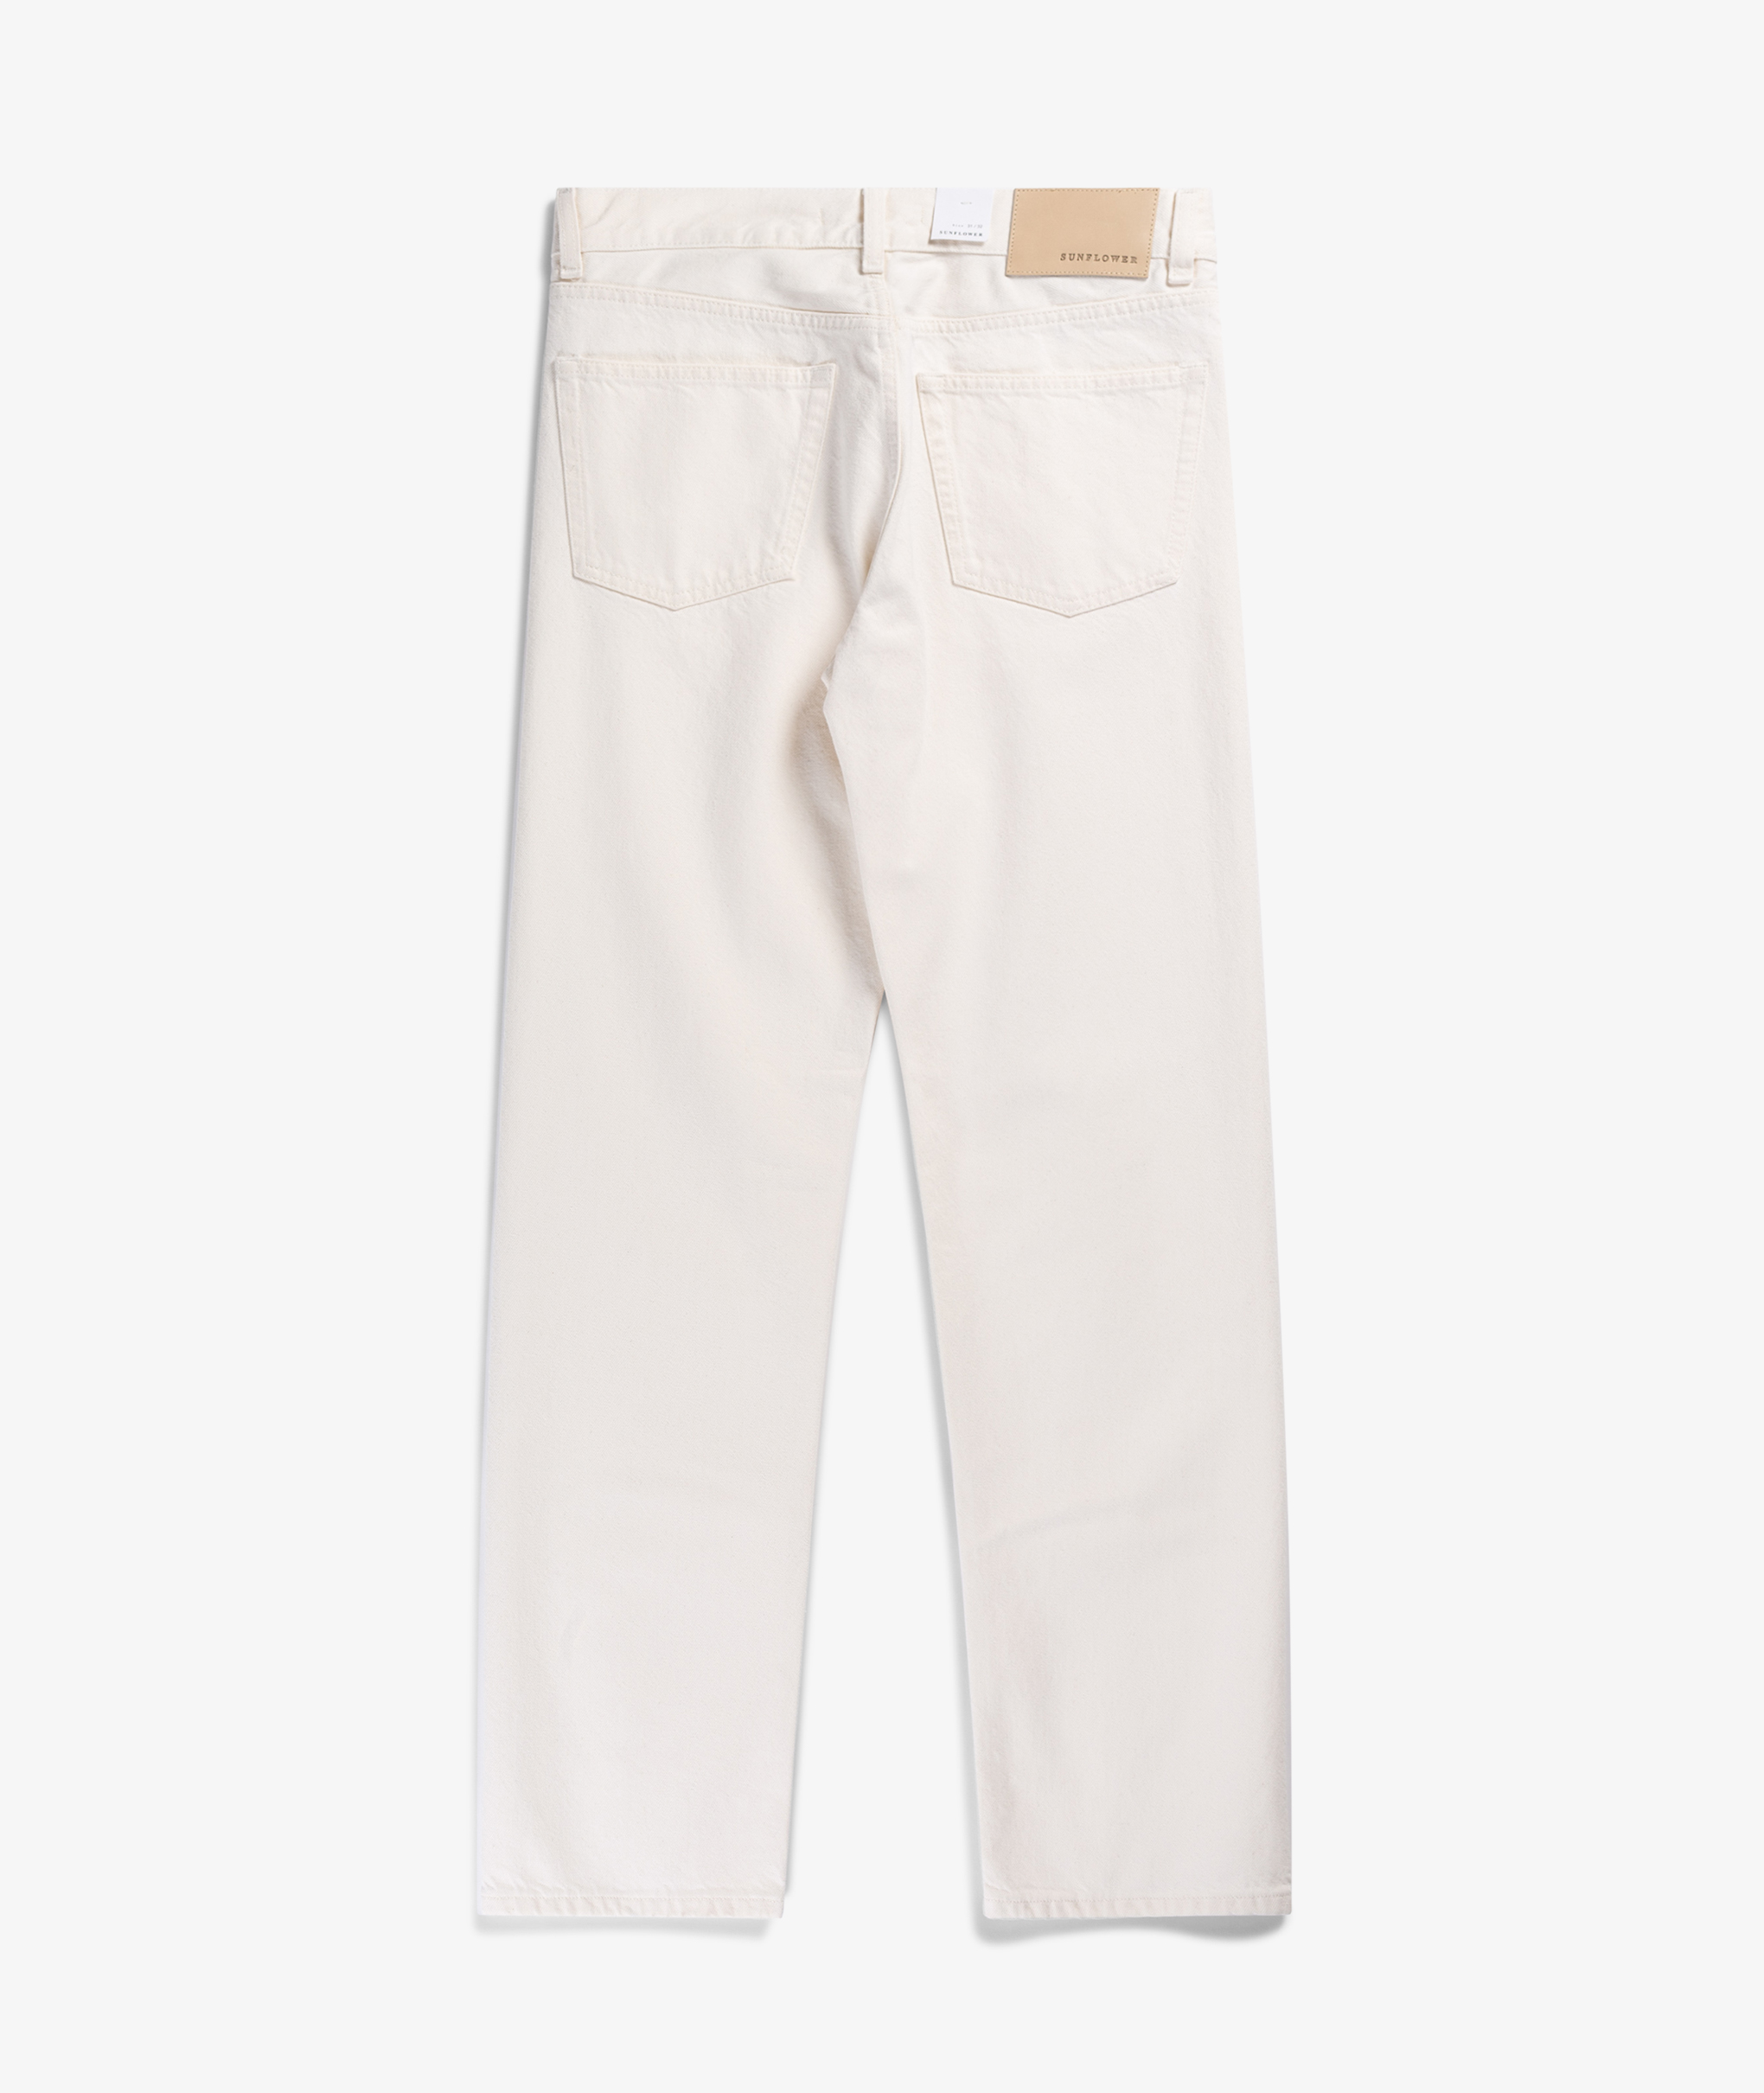 Norse Store | Shipping Worldwide - Sunflower Standard Pant White